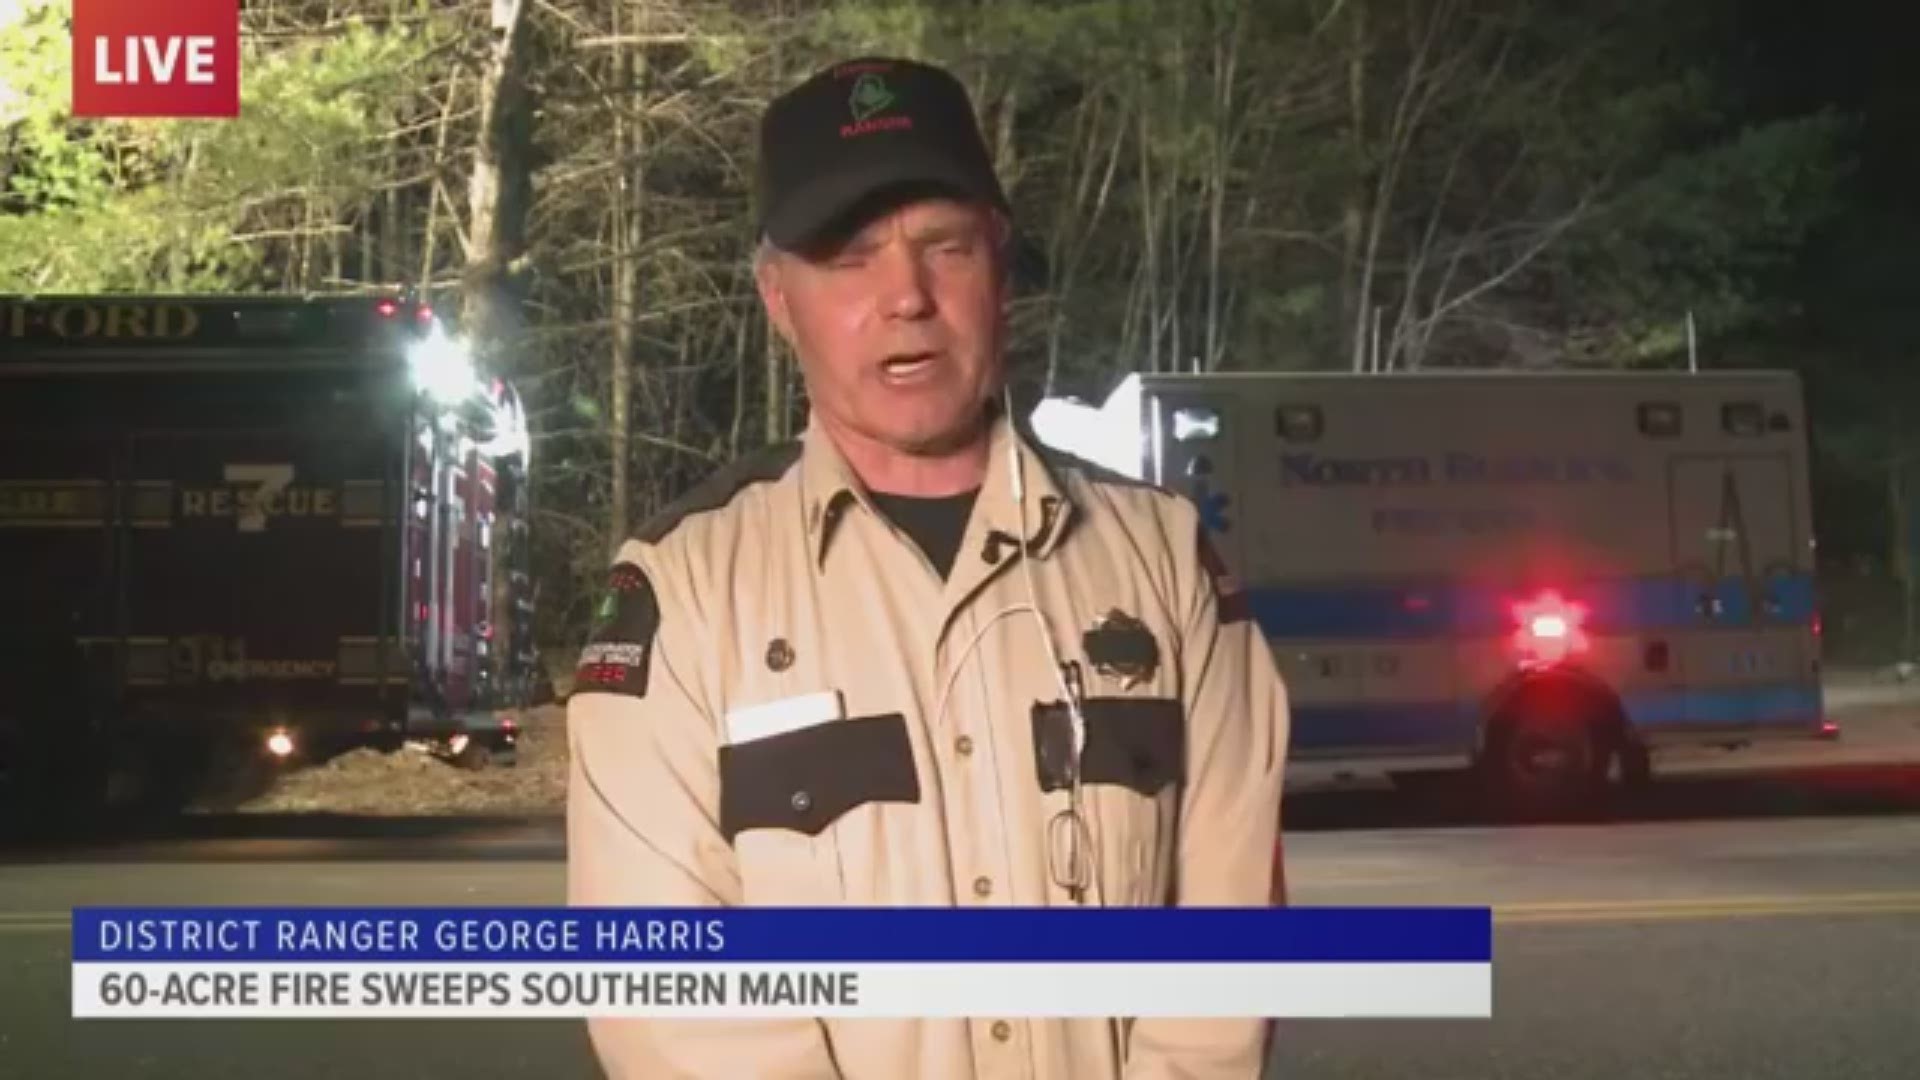 VIDEO: District Ranger George Harris provides update on York County wildfire